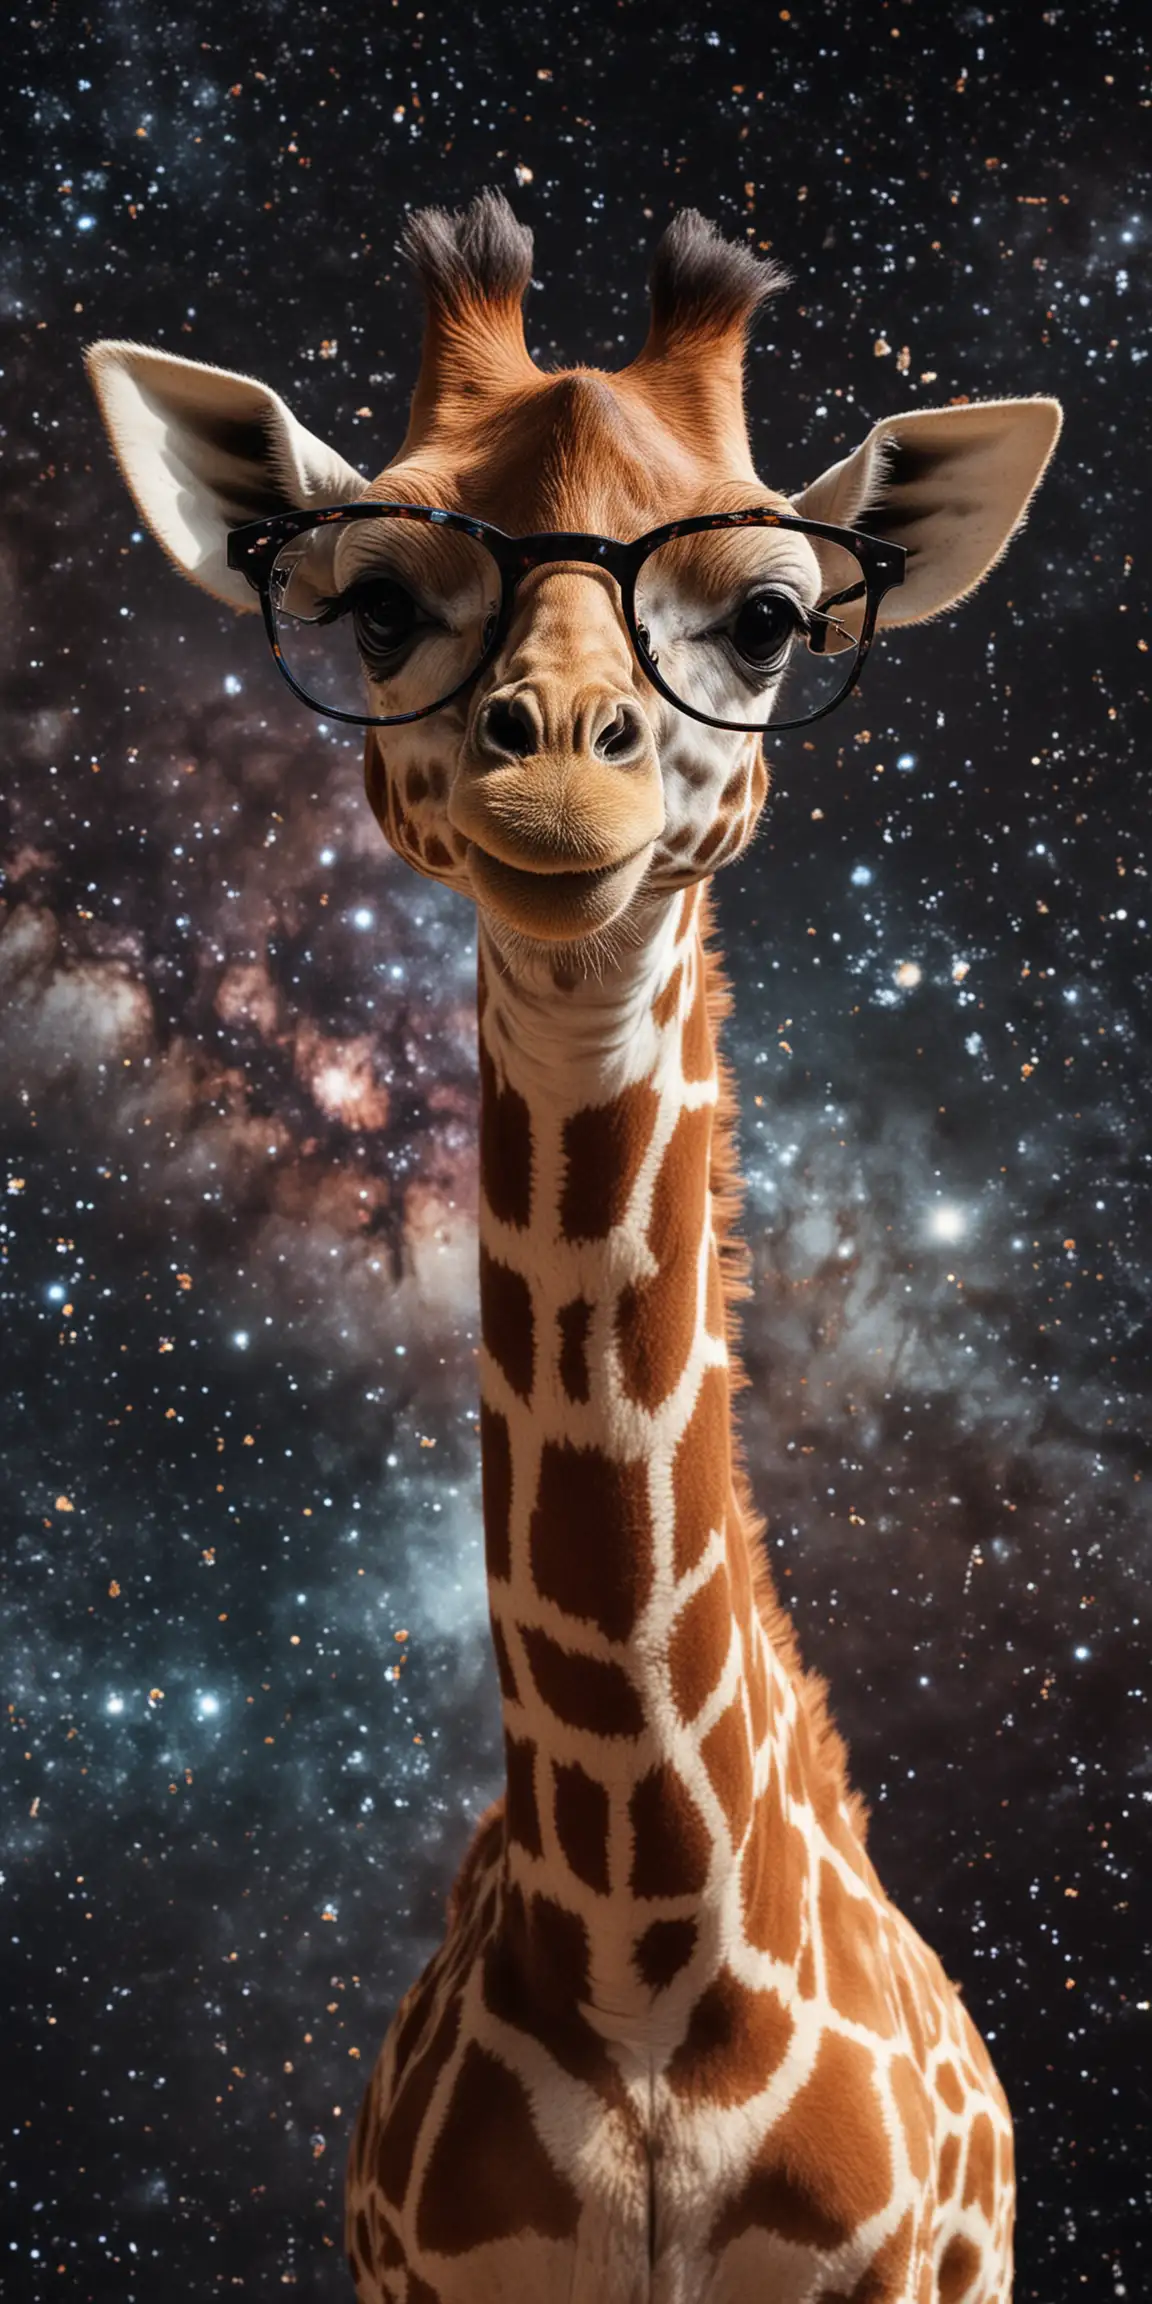 baby Giraffe with glasses in the space